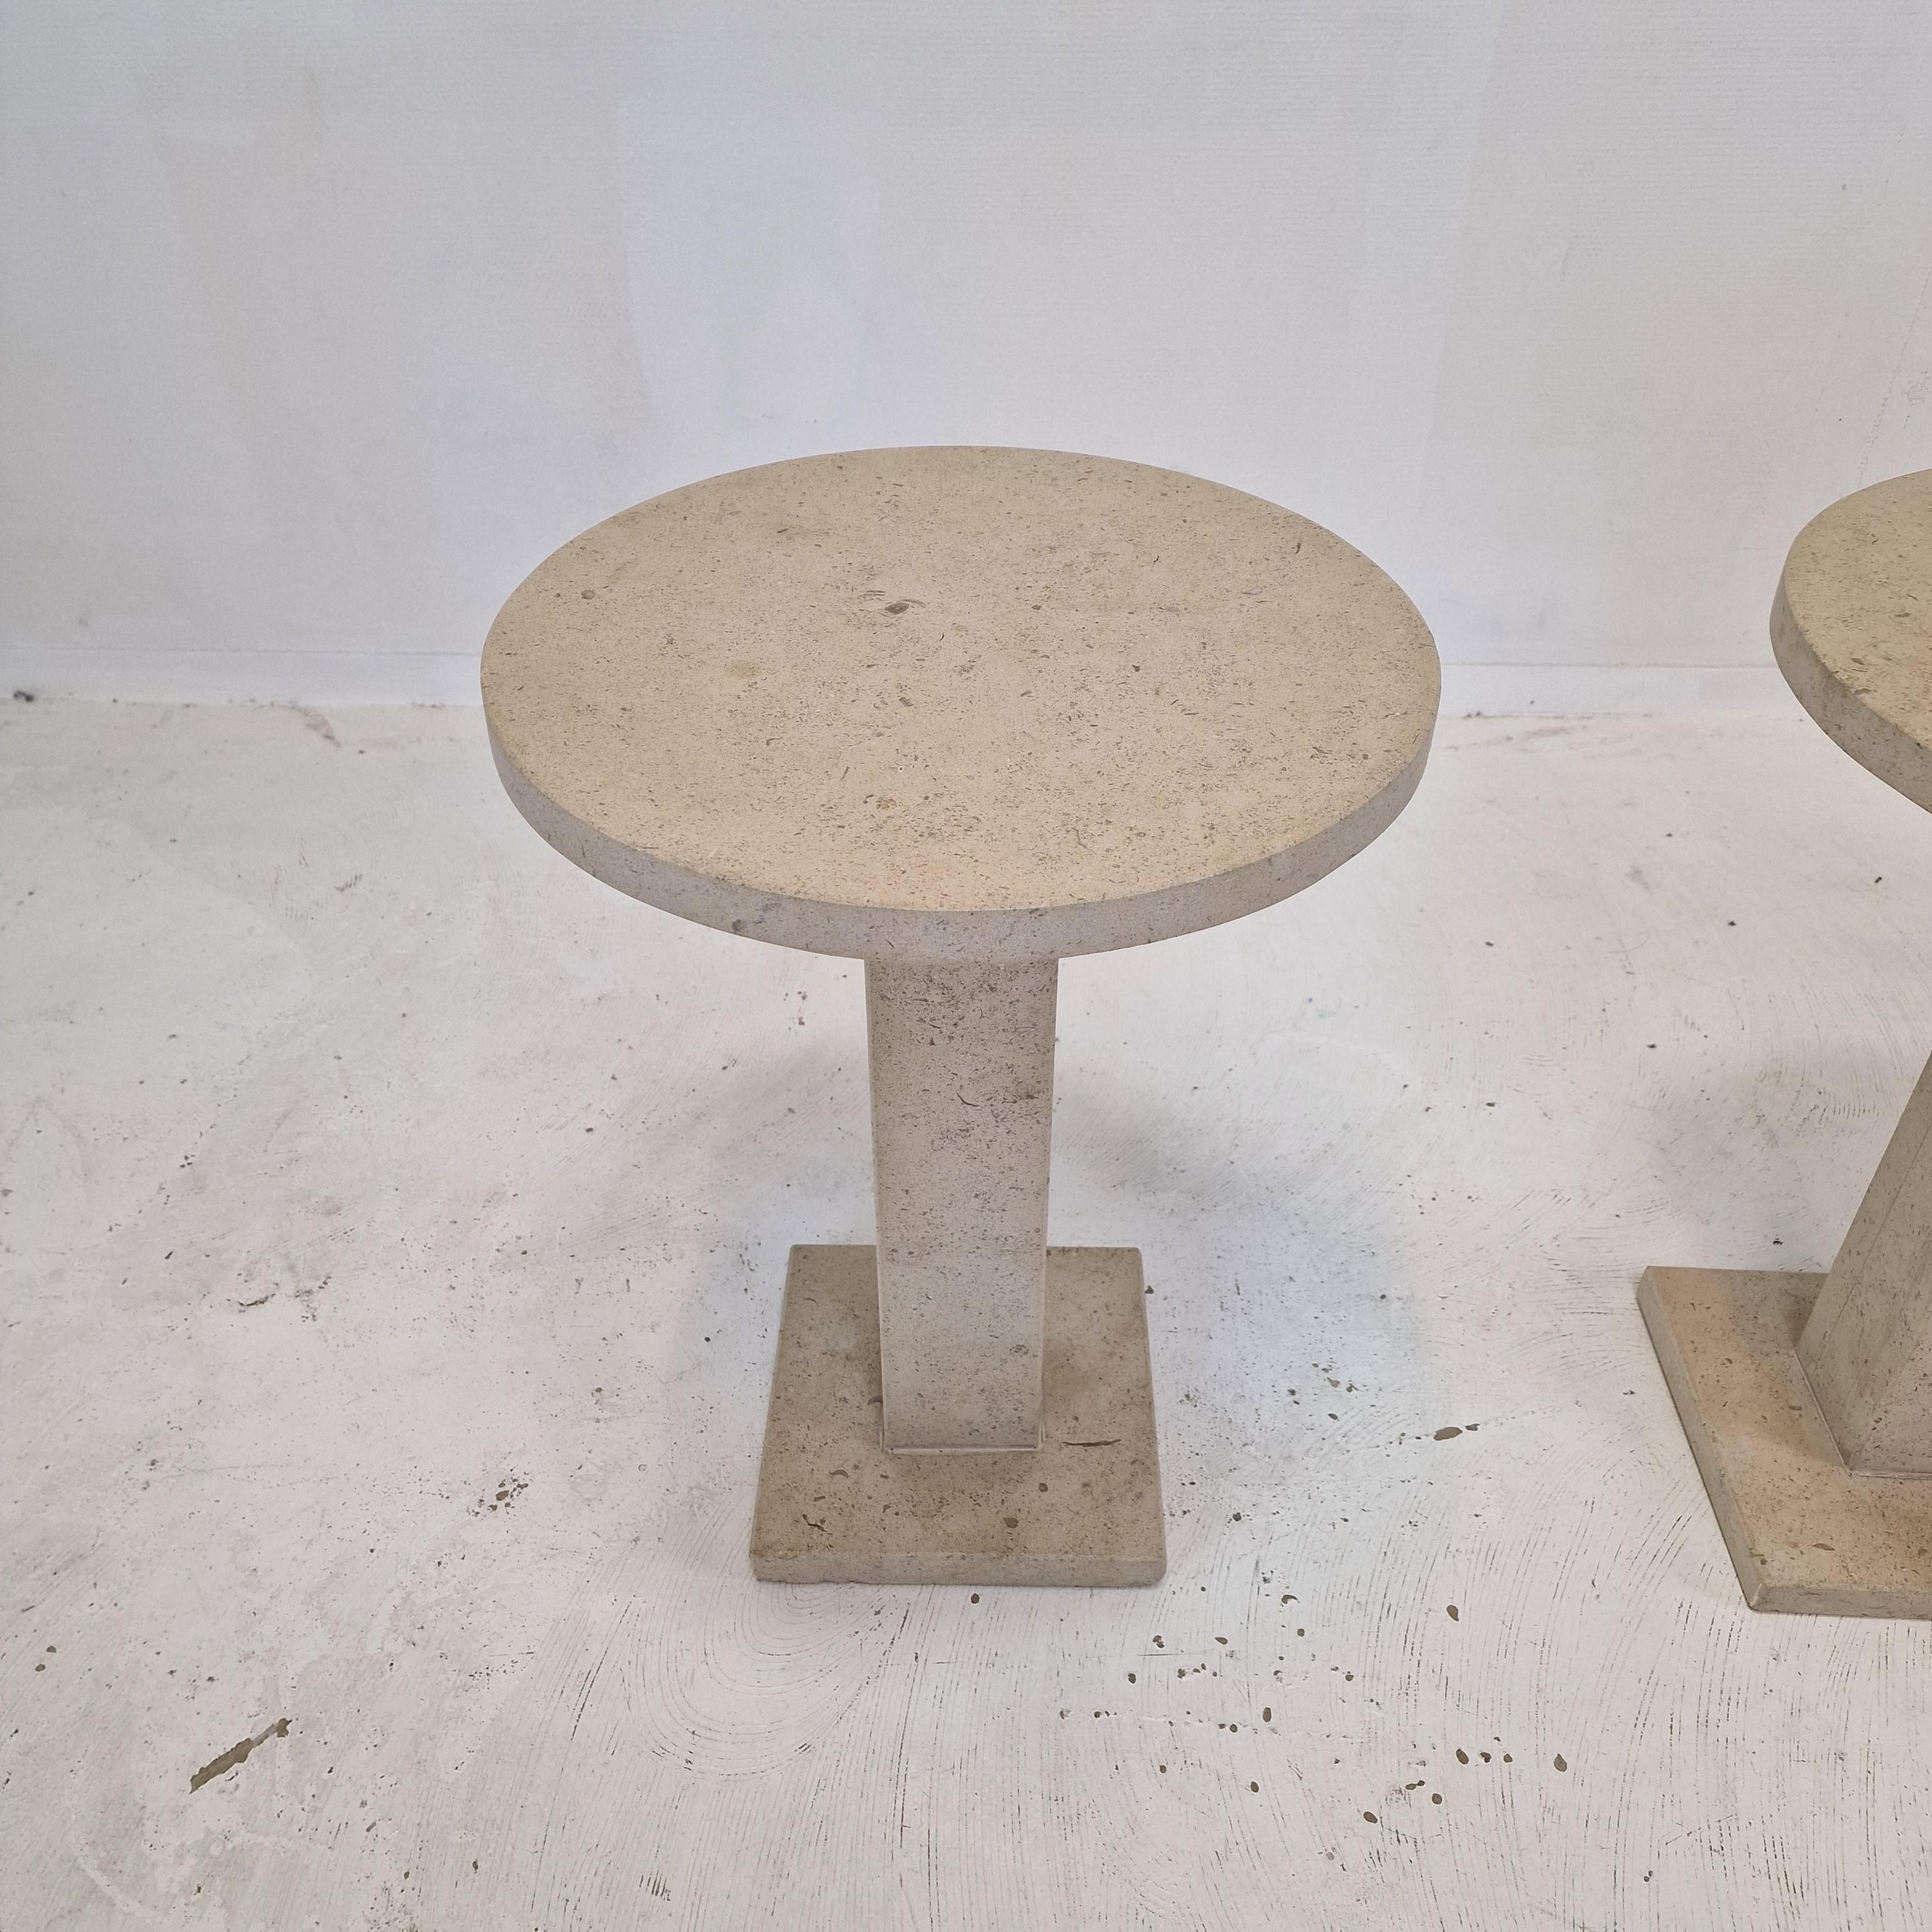 Set of 2 Italian Travertine or Stone Pedestals or Side Tables, 1980s For Sale 3